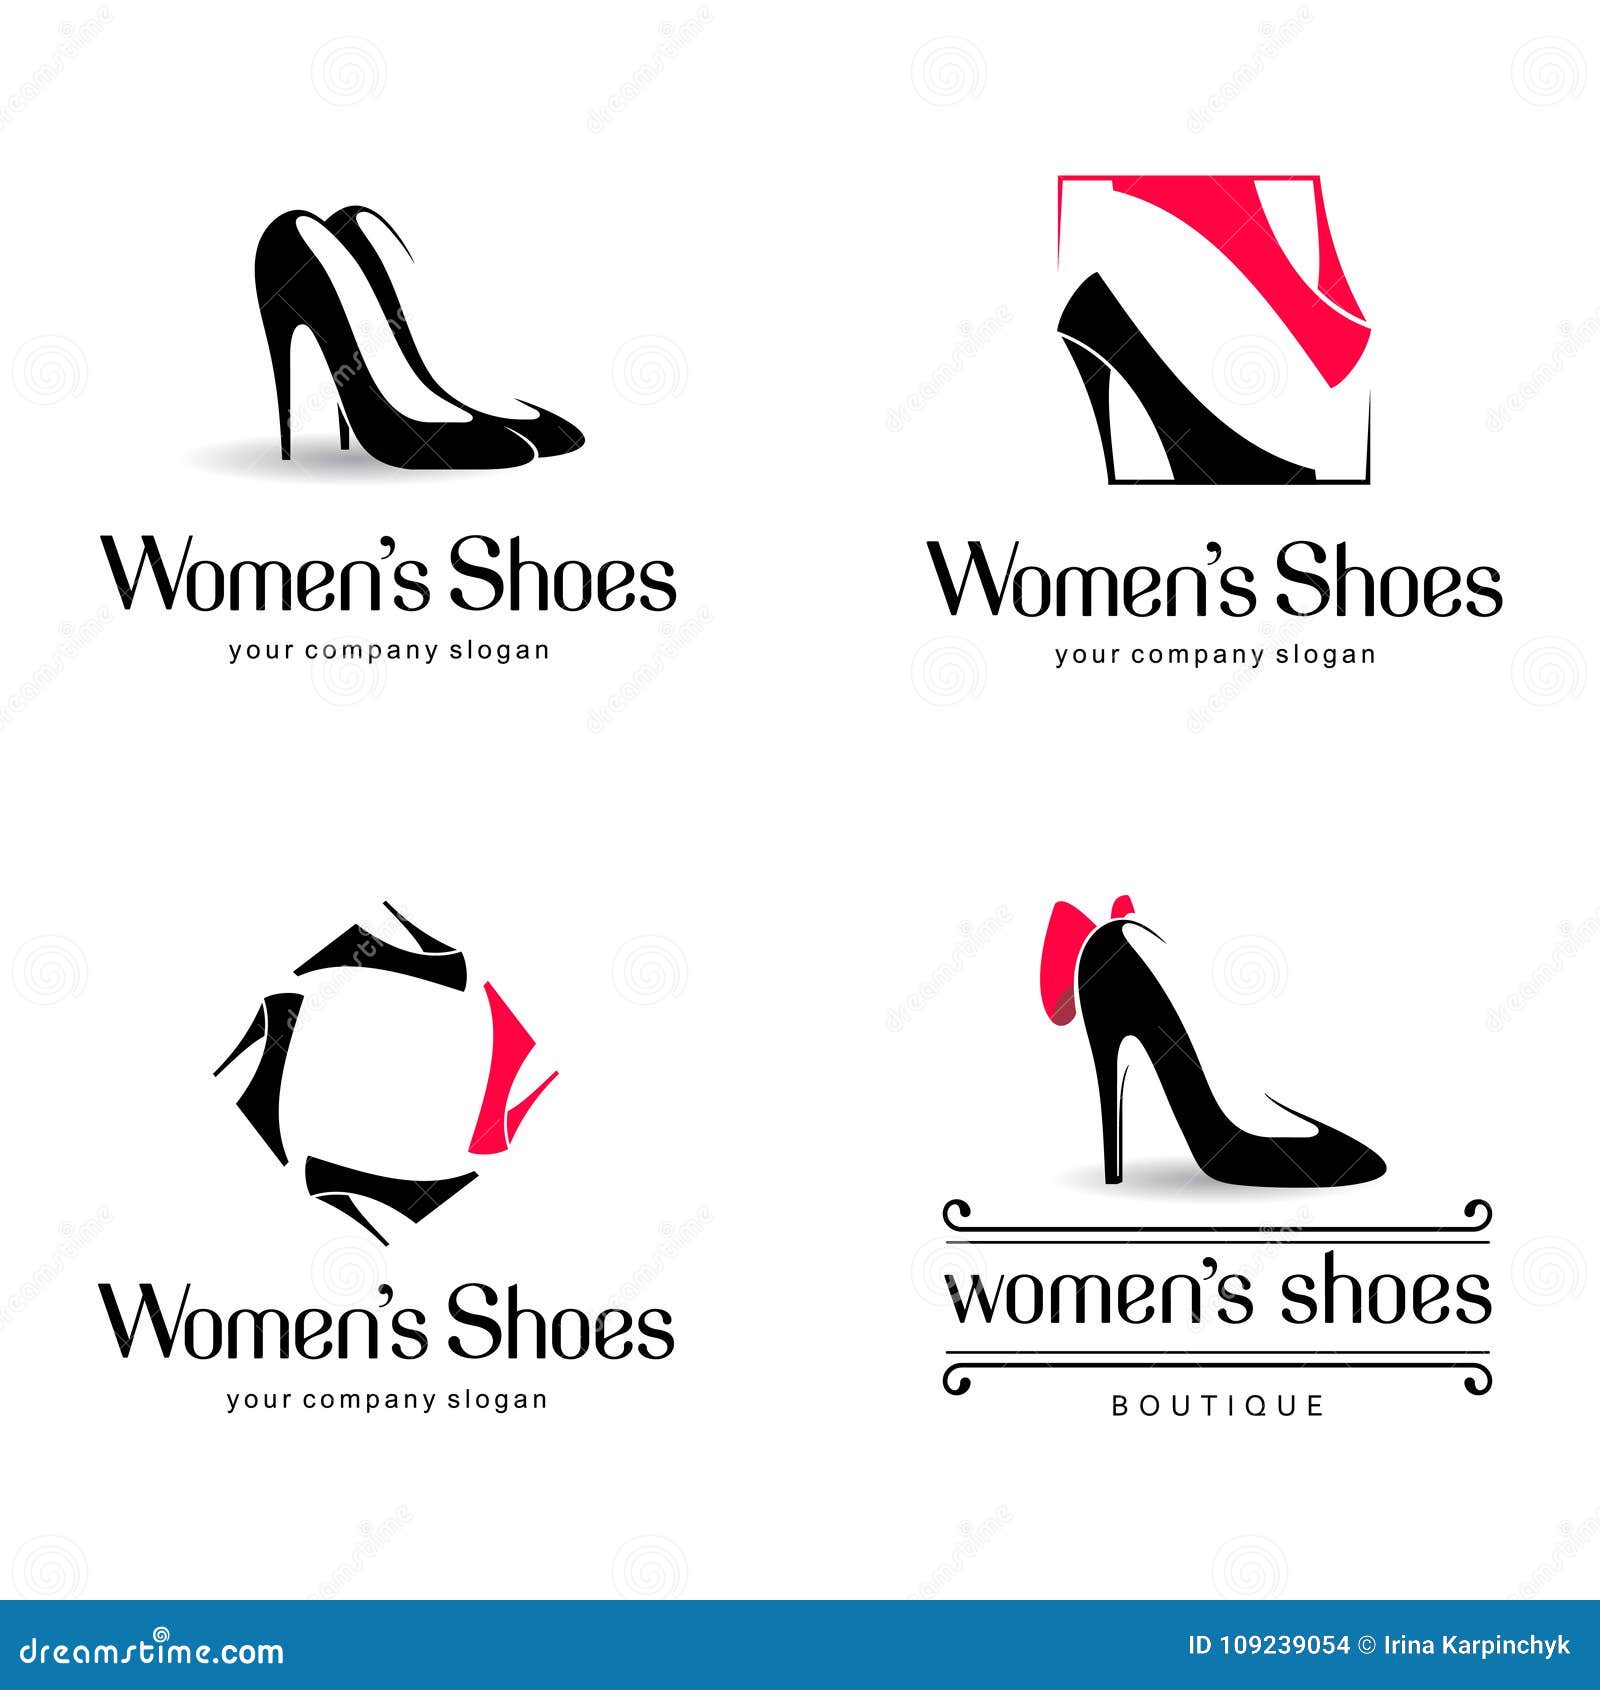 Astonishing Collection of Women's Shoes Images in Full 4K - Over 999 ...